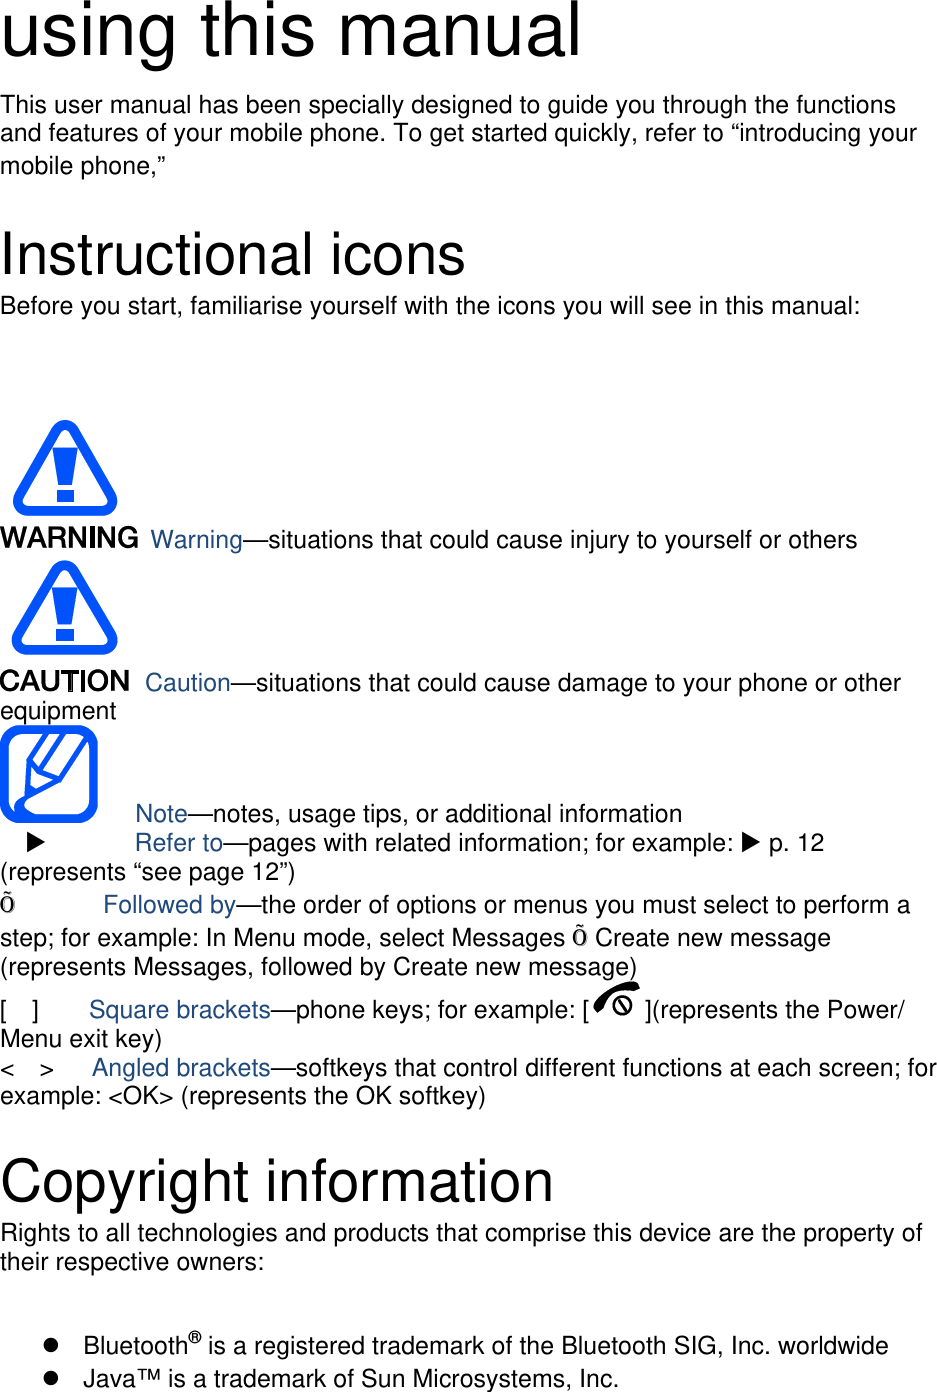 using this manual This user manual has been specially designed to guide you through the functions and features of your mobile phone. To get started quickly, refer to “introducing your mobile phone,”  Instructional icons Before you start, familiarise yourself with the icons you will see in this manual:   Warning—situations that could cause injury to yourself or others  Caution—situations that could cause damage to your phone or other equipment    Note—notes, usage tips, or additional information   X       Refer to—pages with related information; for example: X p. 12 (represents “see page 12”) Õ       Followed by—the order of options or menus you must select to perform a step; for example: In Menu mode, select Messages Õ Create new message (represents Messages, followed by Create new message) [  ]    Square brackets—phone keys; for example: [ ](represents the Power/ Menu exit key) &lt;  &gt;   Angled brackets—softkeys that control different functions at each screen; for example: &lt;OK&gt; (represents the OK softkey)  Copyright information Rights to all technologies and products that comprise this device are the property of their respective owners:  z Bluetooth® is a registered trademark of the Bluetooth SIG, Inc. worldwide z  Java™ is a trademark of Sun Microsystems, Inc. 